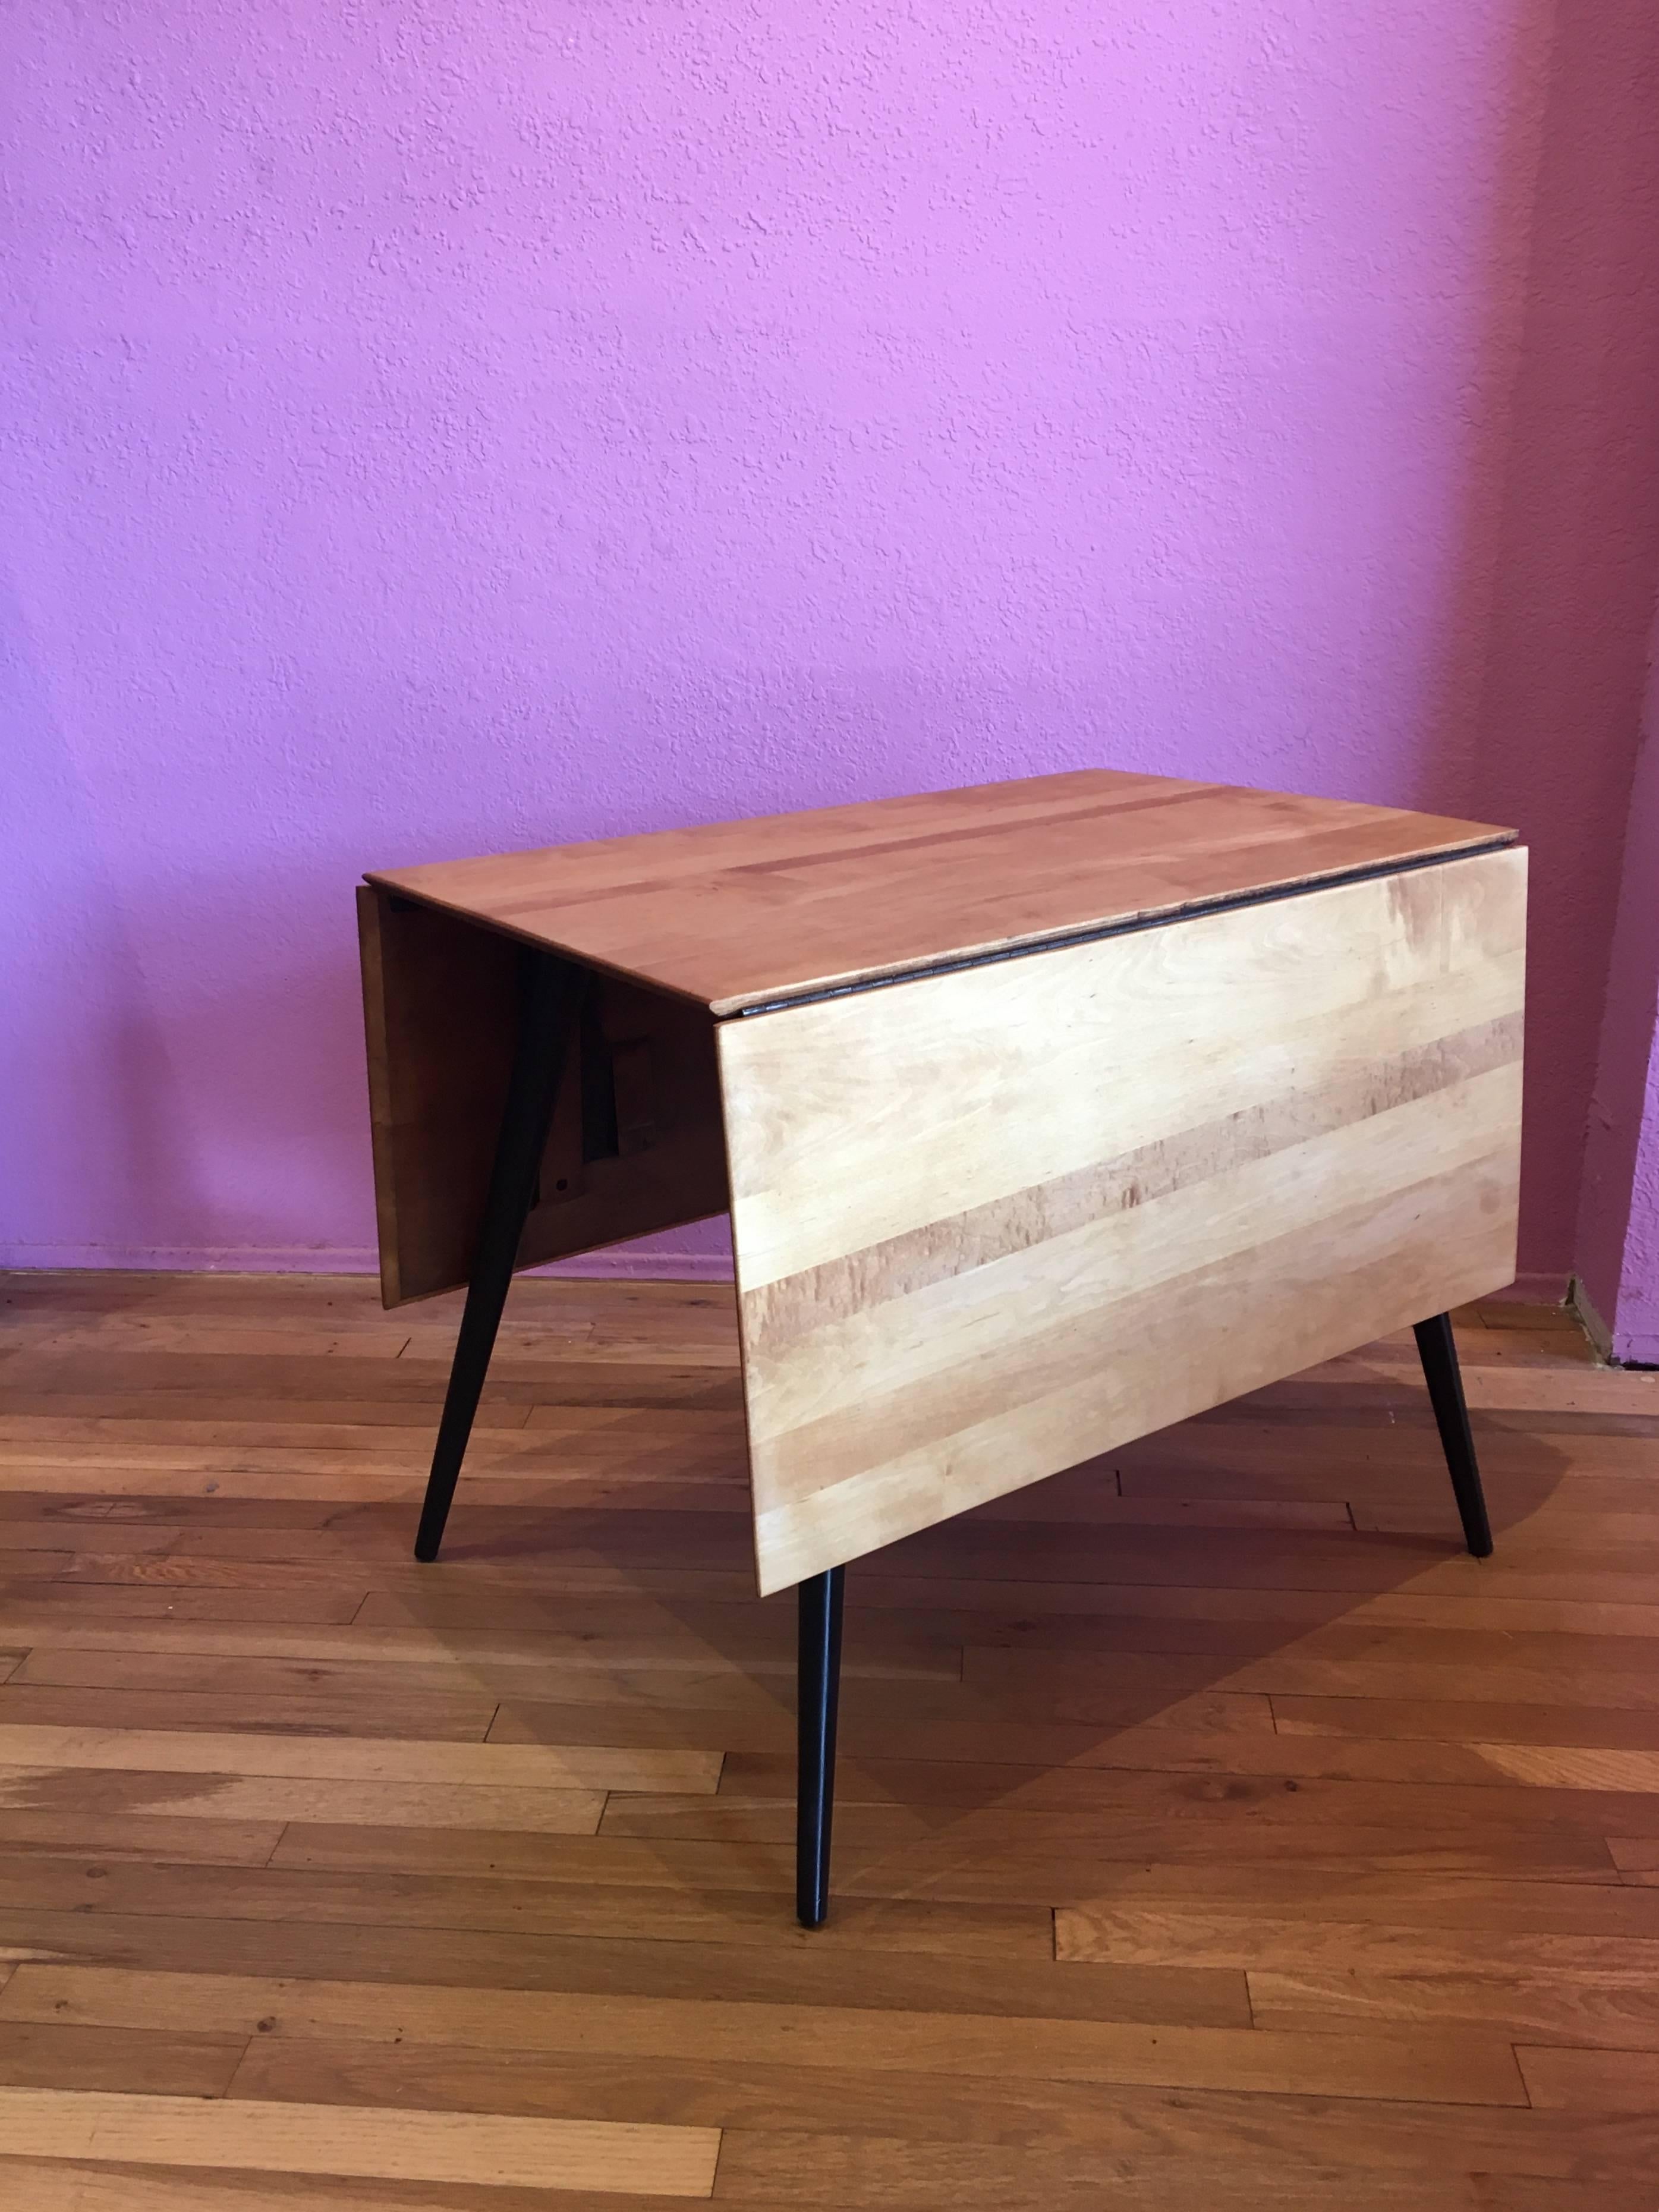 Great design on this versatile drop-leaf dining table designed by Paul McCobb as part of the Planner Group Line, circa 1950s. Freshly refinished, the top is solid wood and the legs have been lacquered in black. The table its solid and sturdy, you